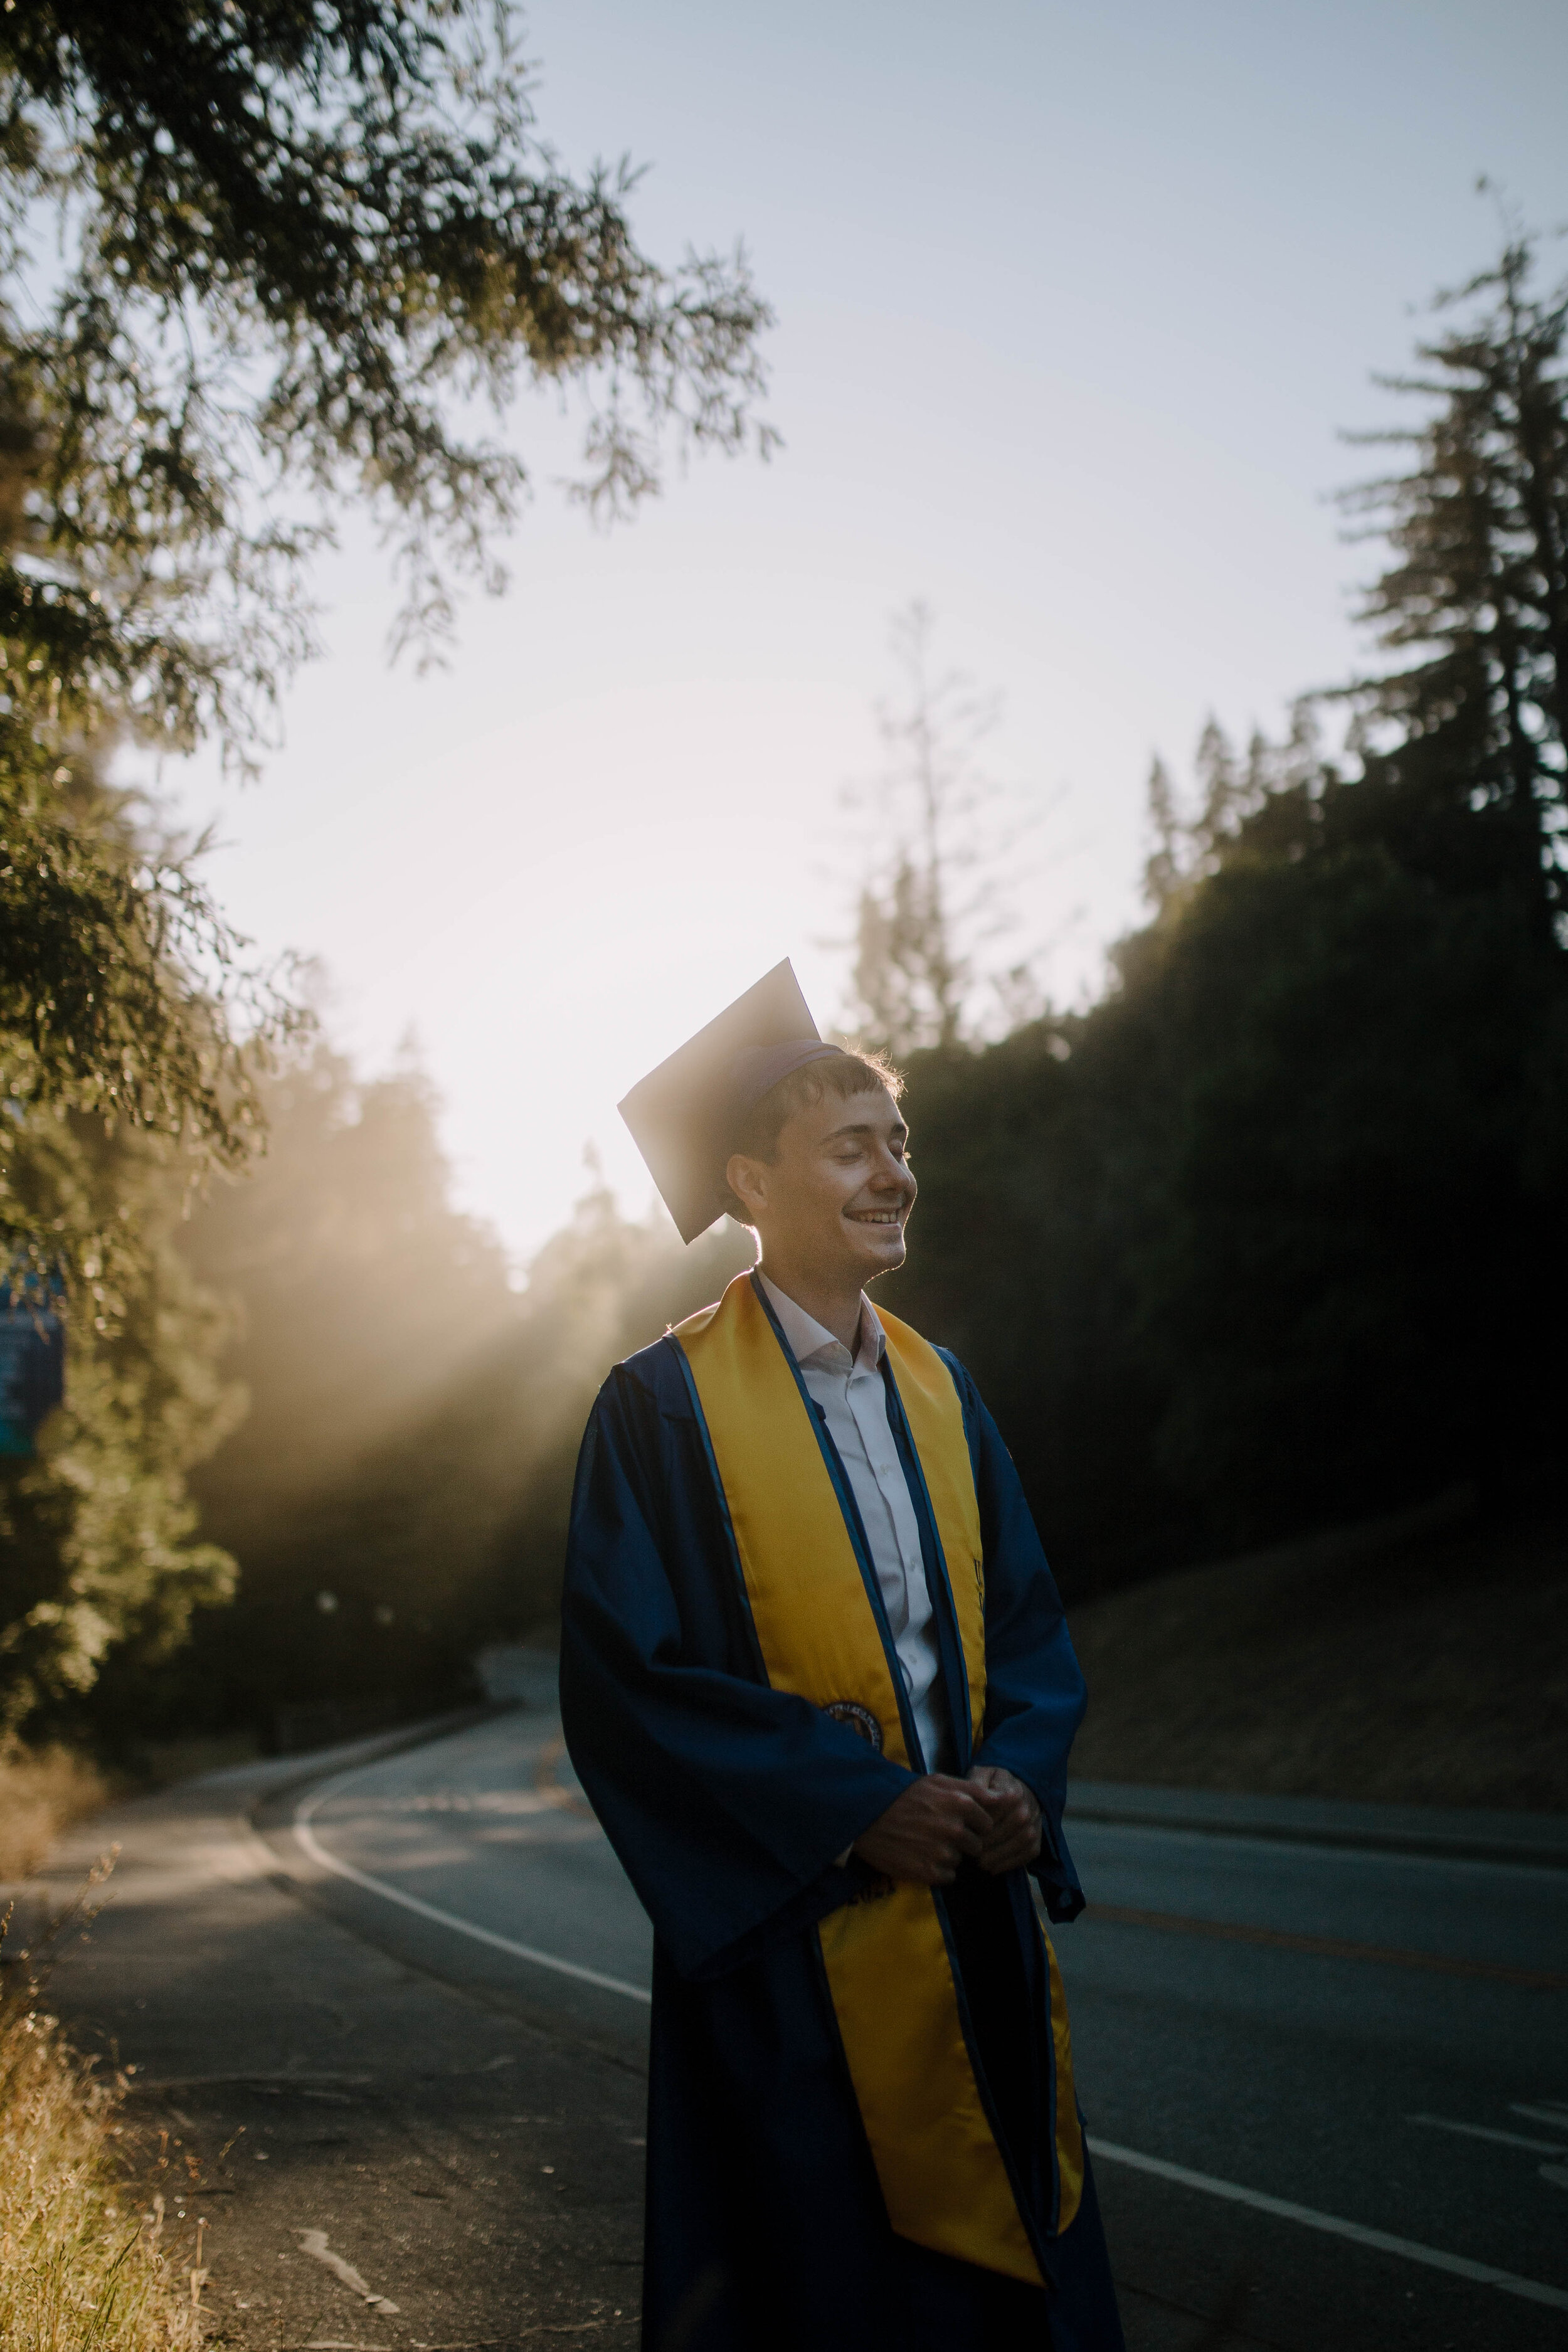  Graduate wearing blue robe and yellow stole in front of road with redwoods on either side. Light streaming behind the person to create a halo effect. 